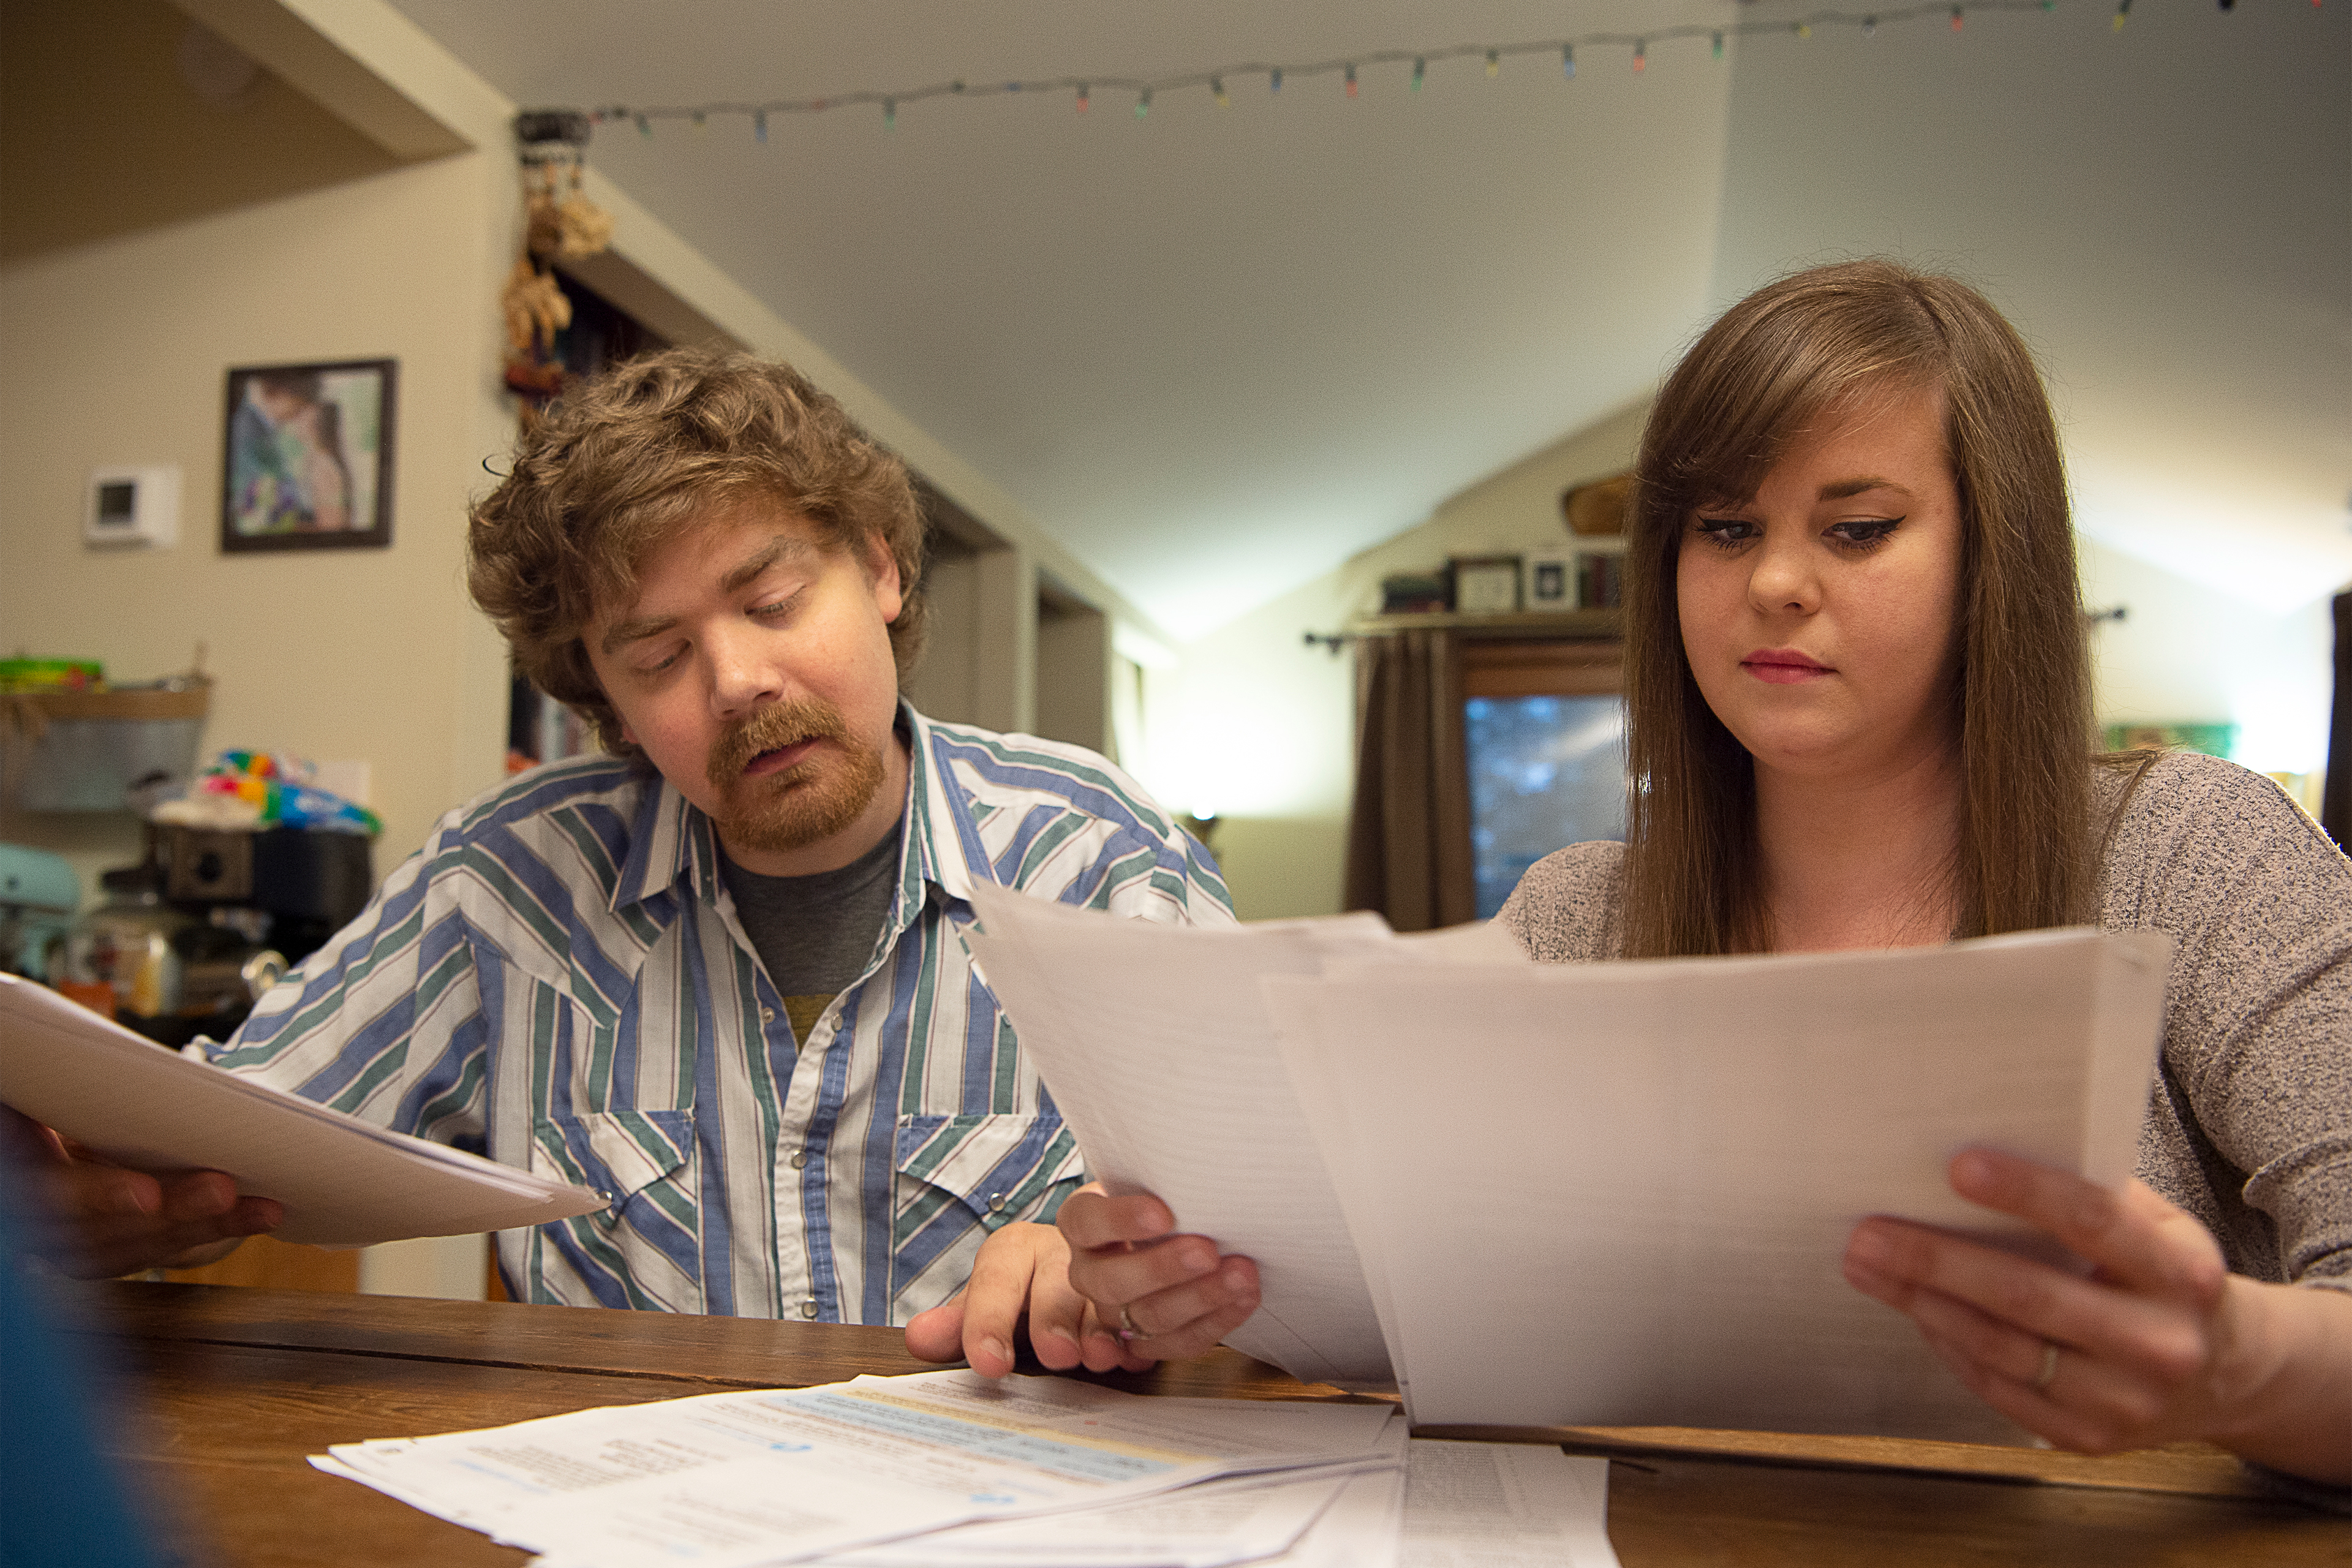 Sean Deines is seen sitting on the left side of a table with his wife, Rebekah, sitting to the right. The two are holding and looking over stacks of medical bills.